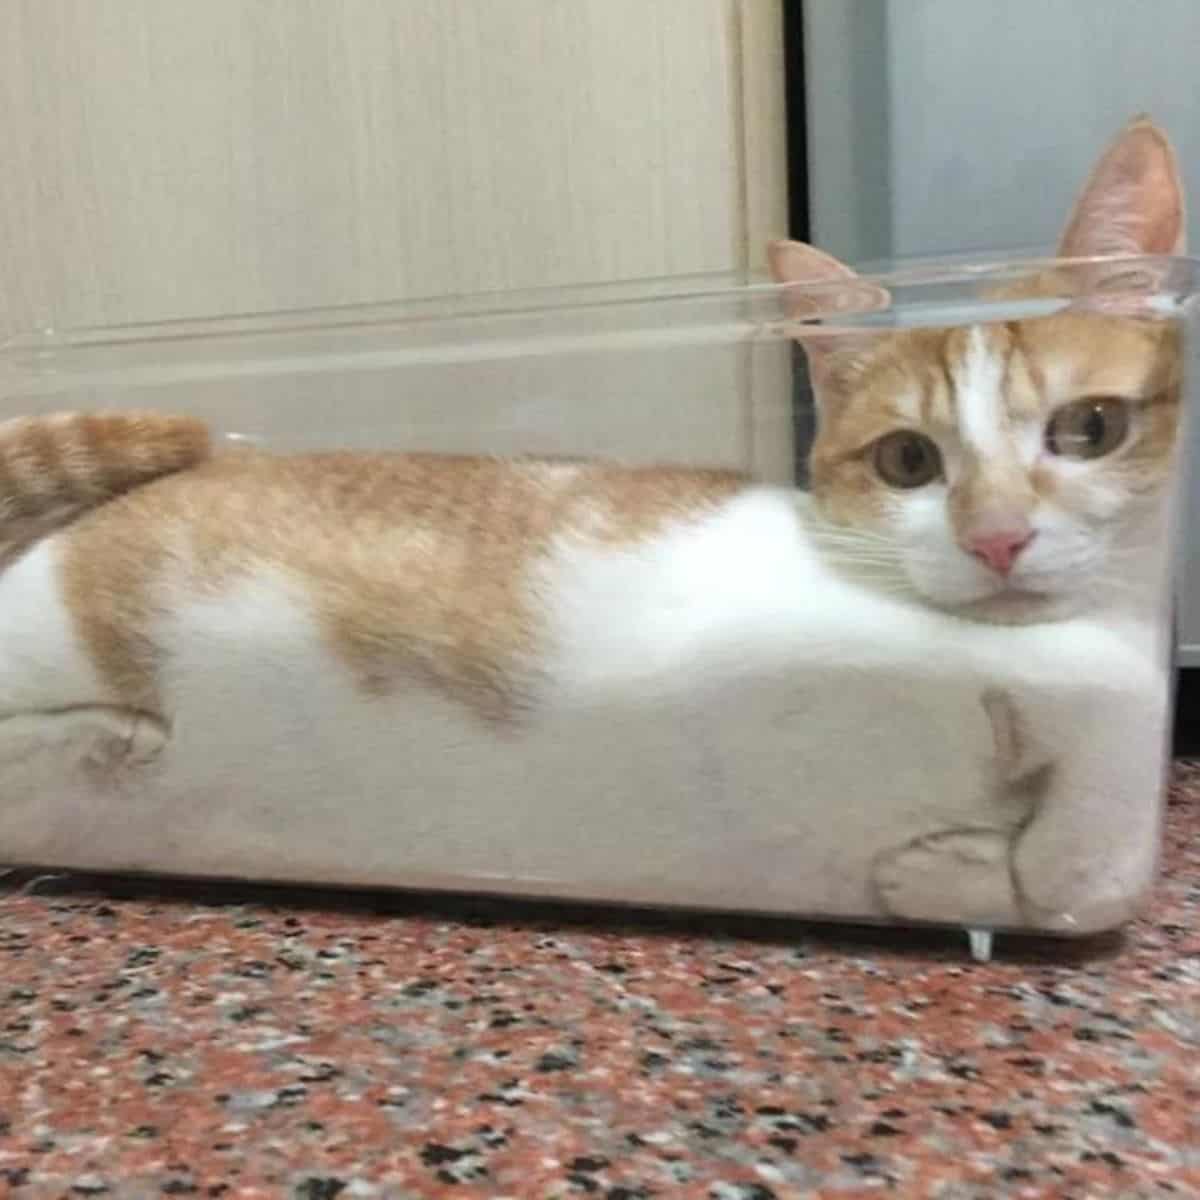 photo of a cat lying in a plastic dish